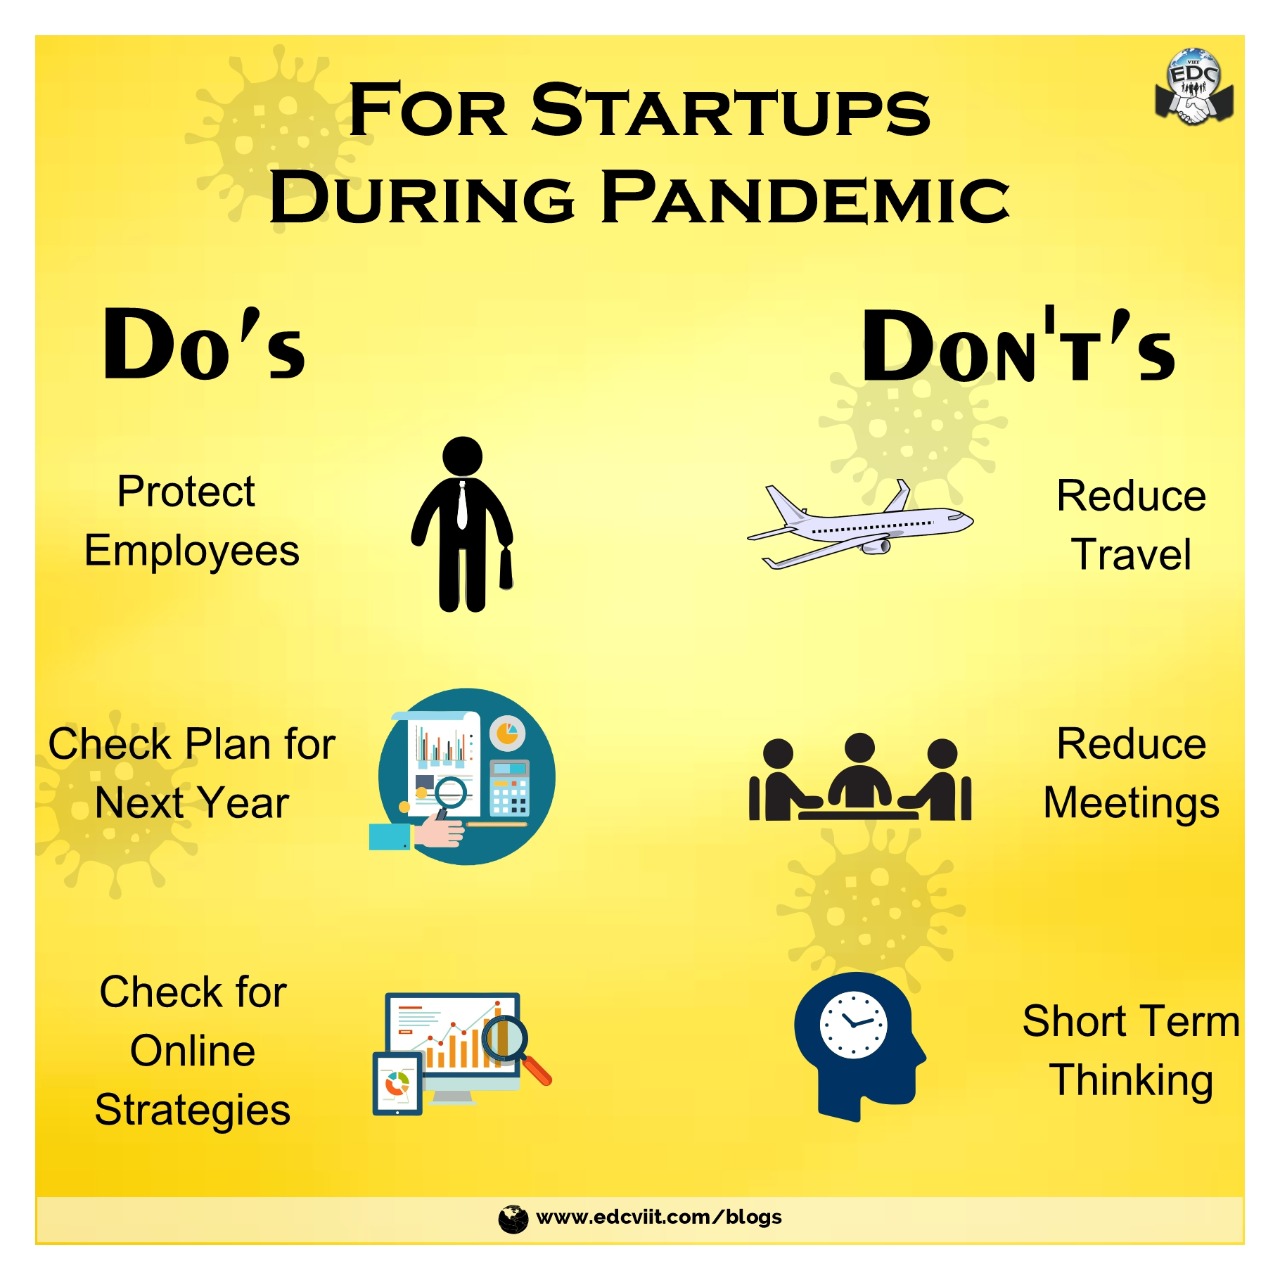 Do’s and Don’ts for a startup during the pandemic